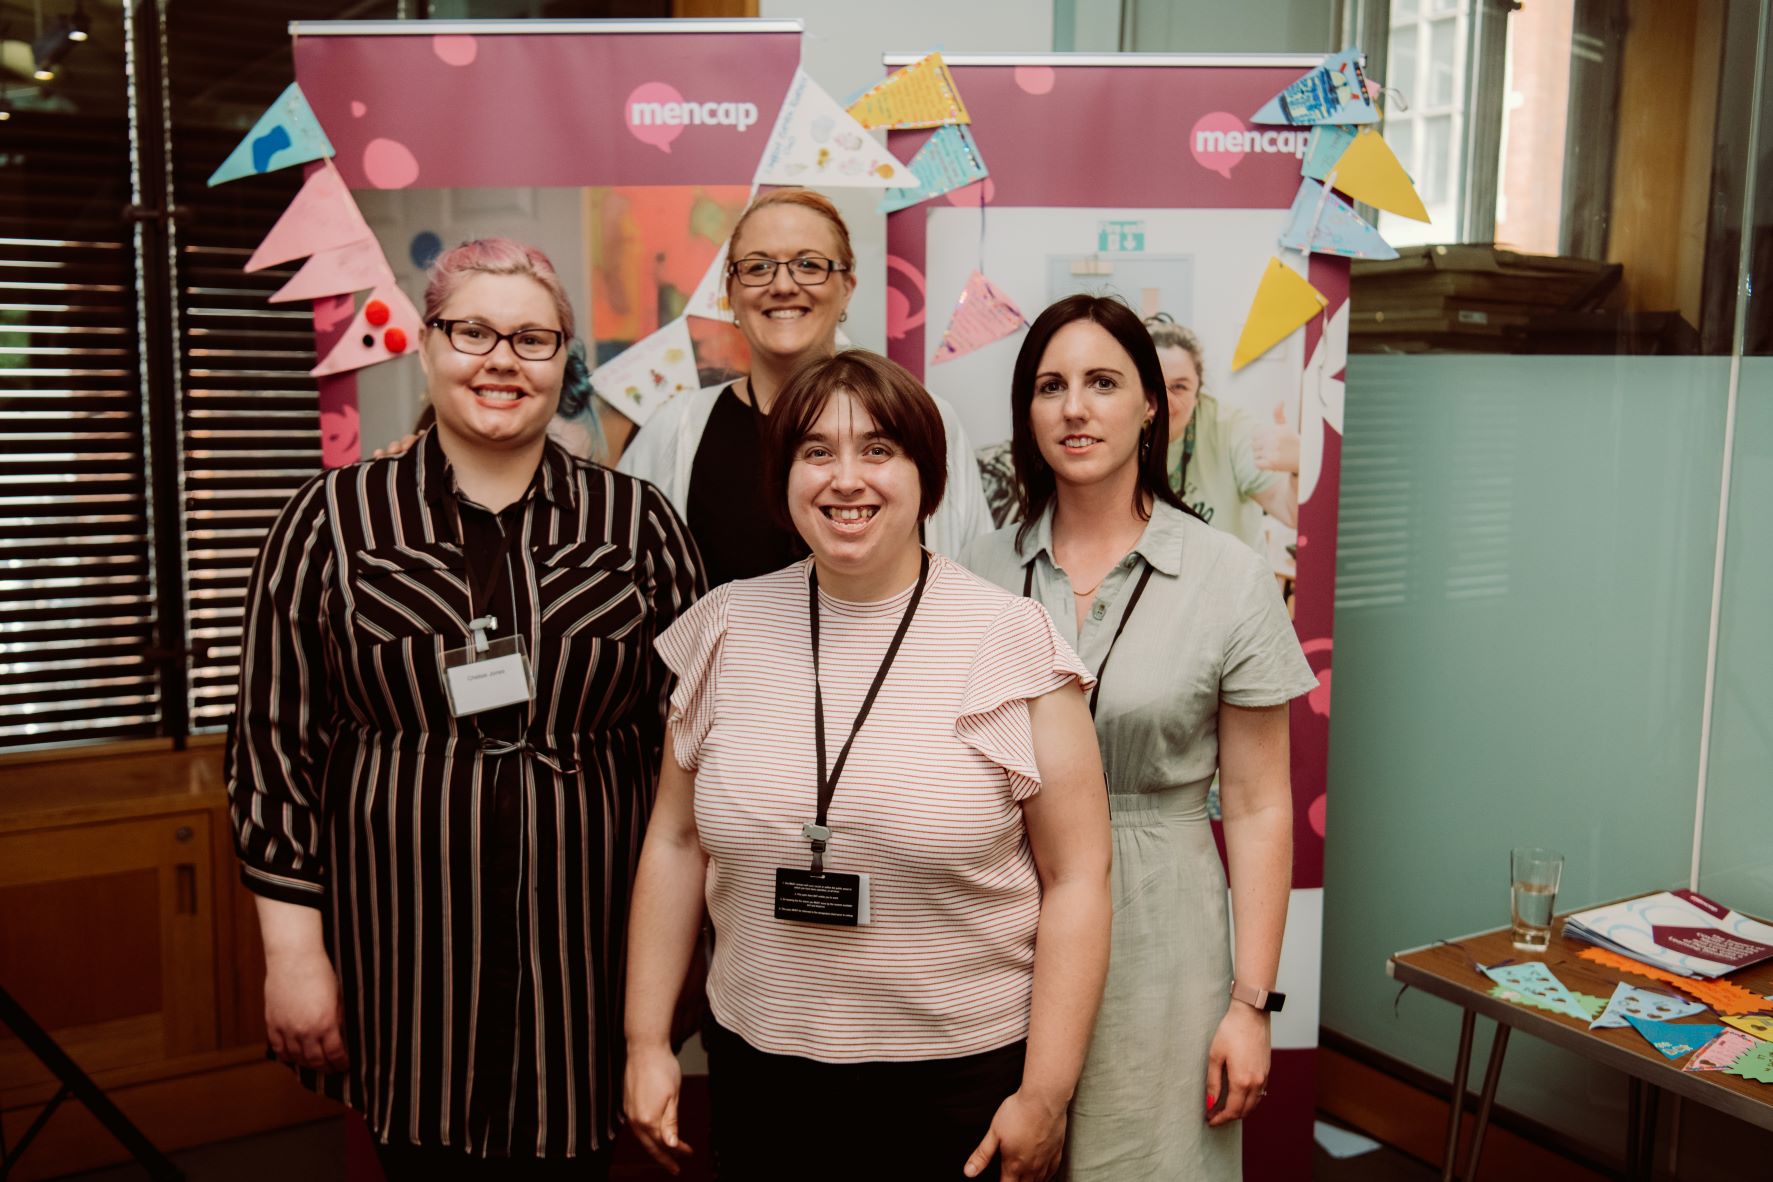 A group of people in a room standing in front of a screen of posters about Mencap